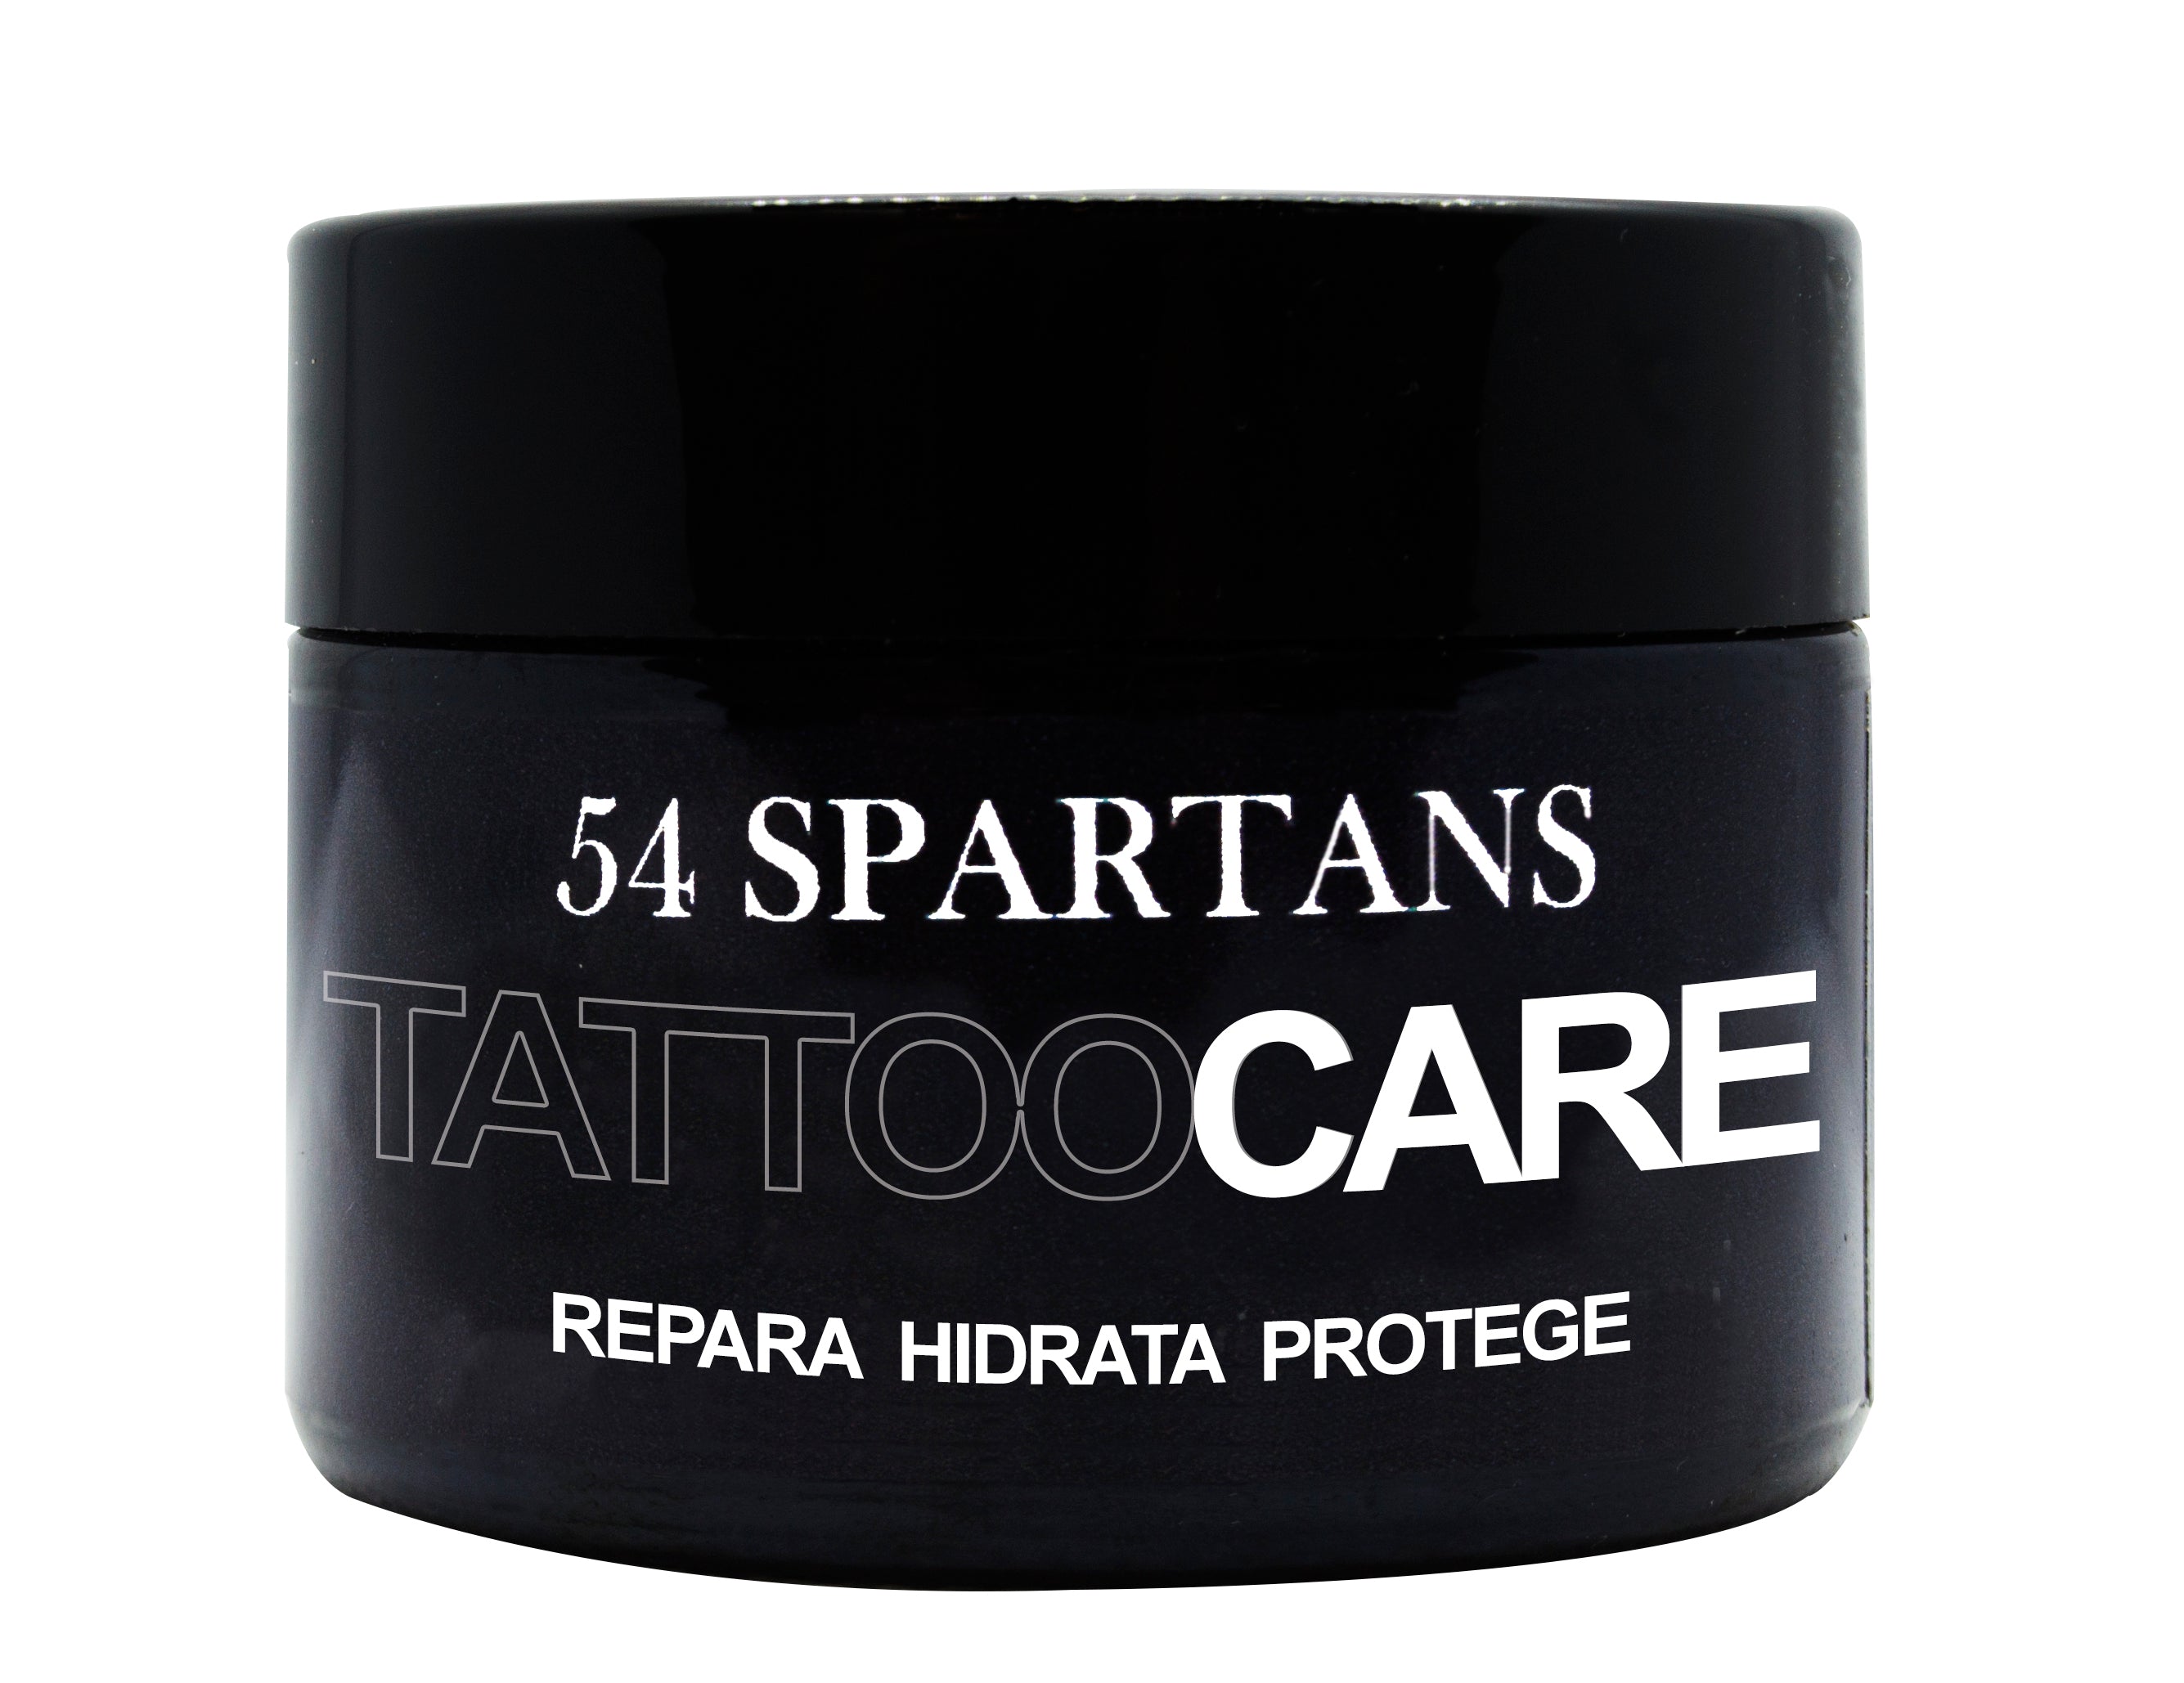 Tattoo Care 54 Spartans